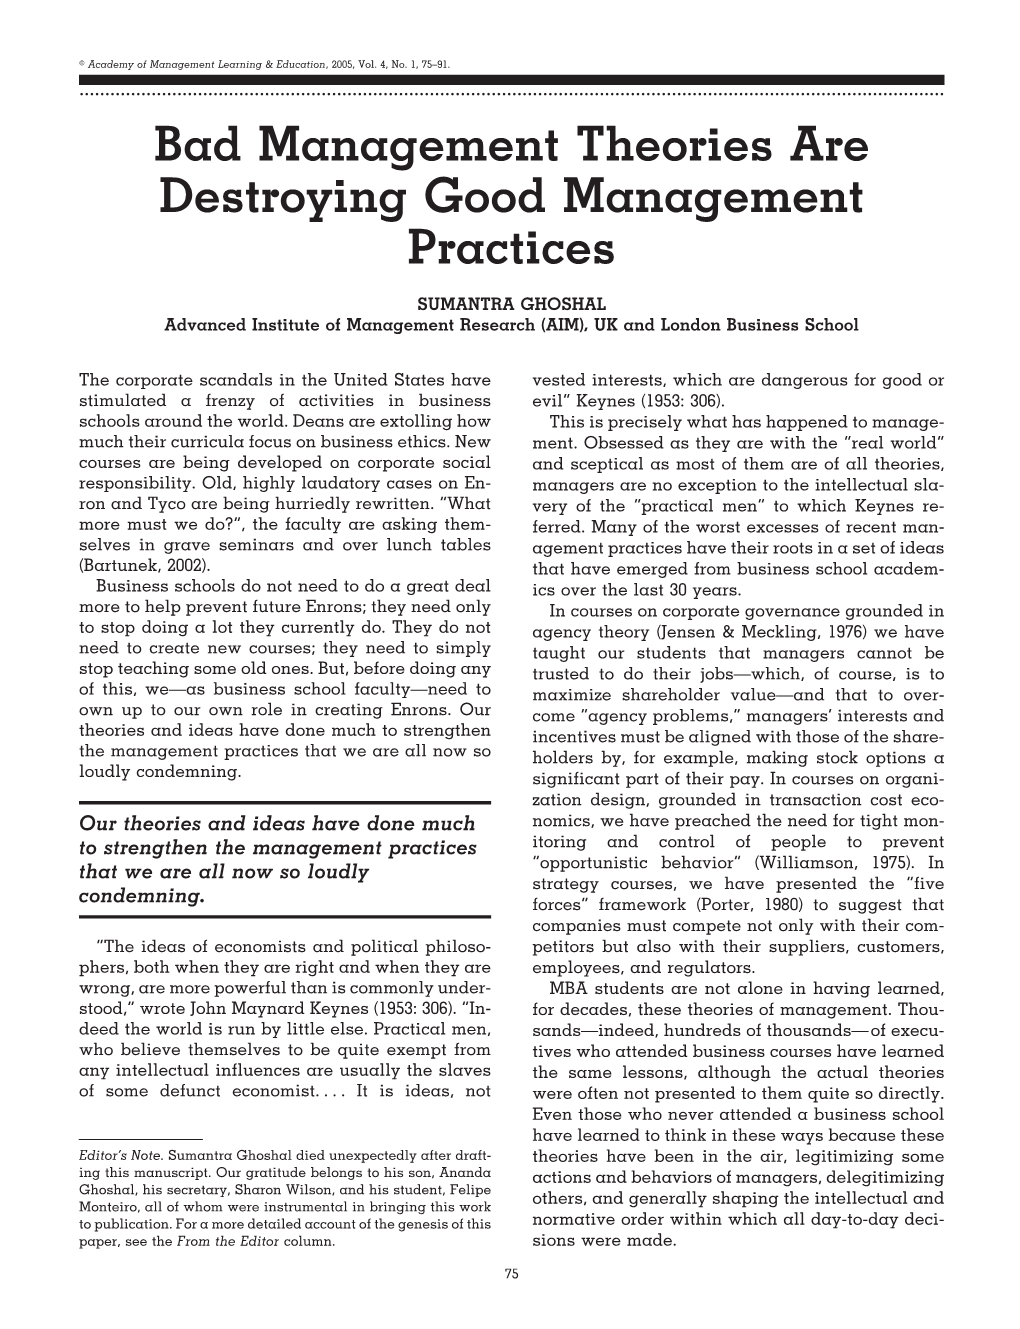 Bad Theory Destroys Good Management